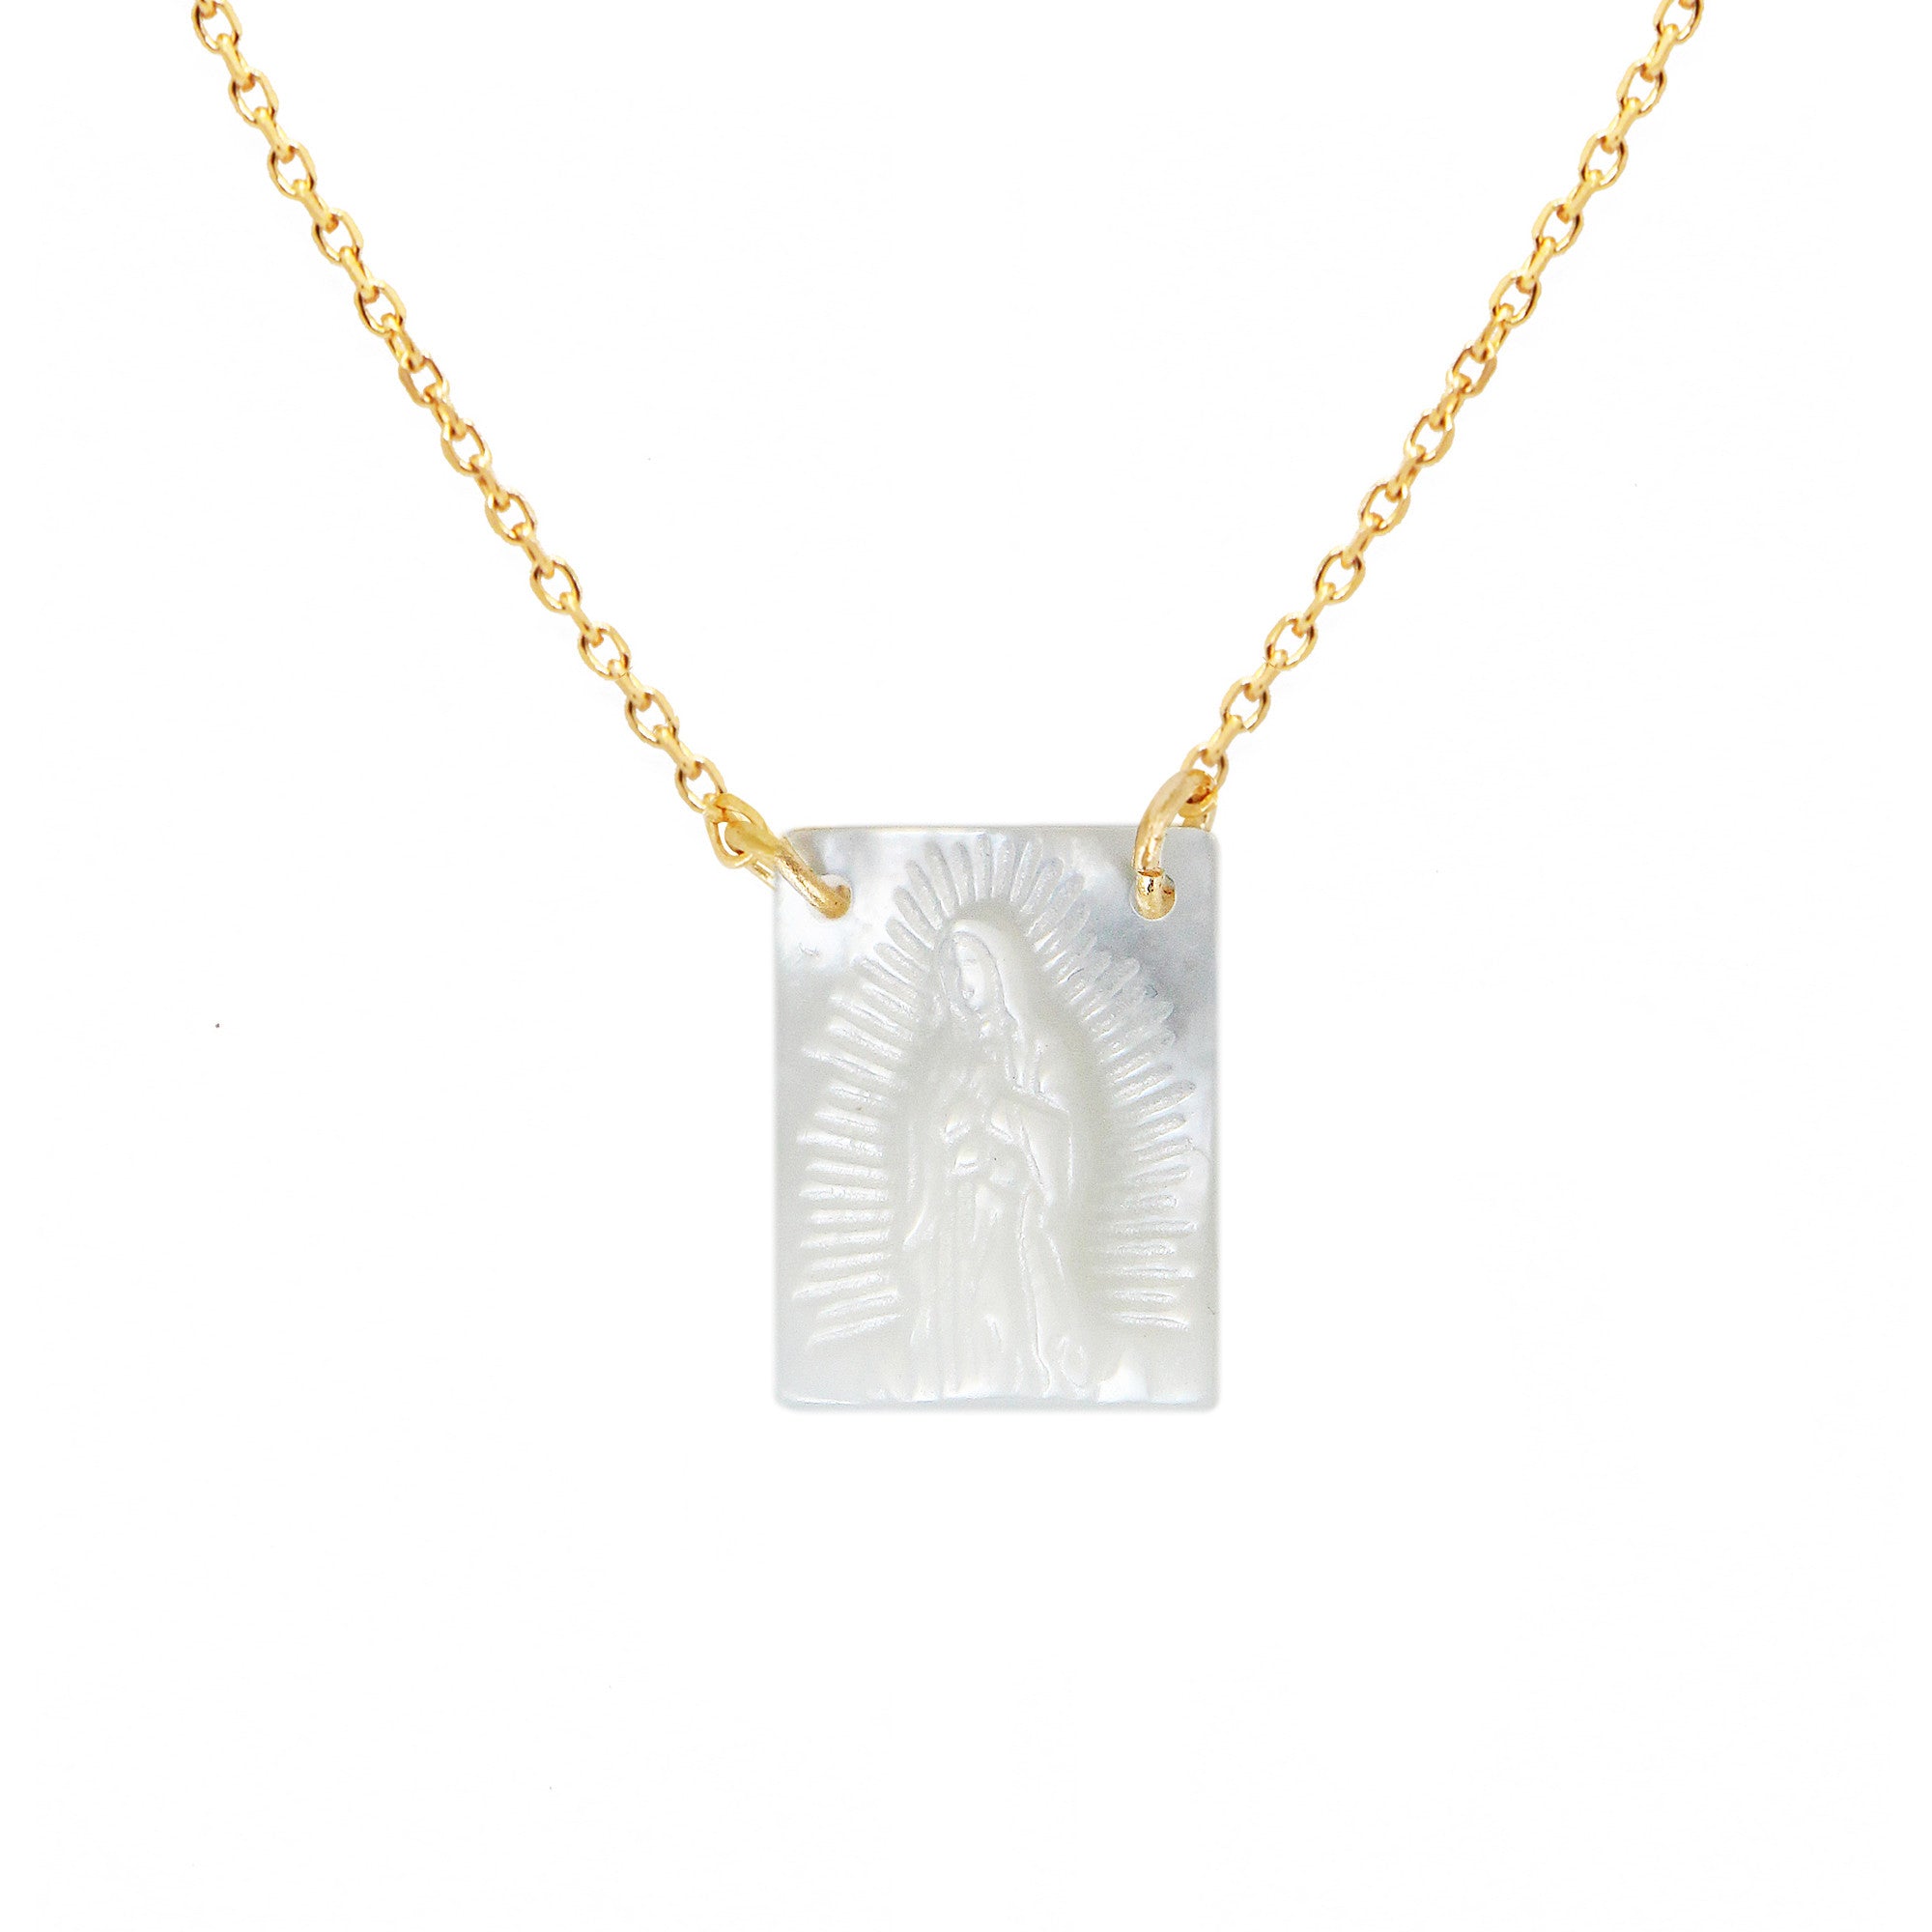 Mother-of-Pearl Madonna Medal Necklace